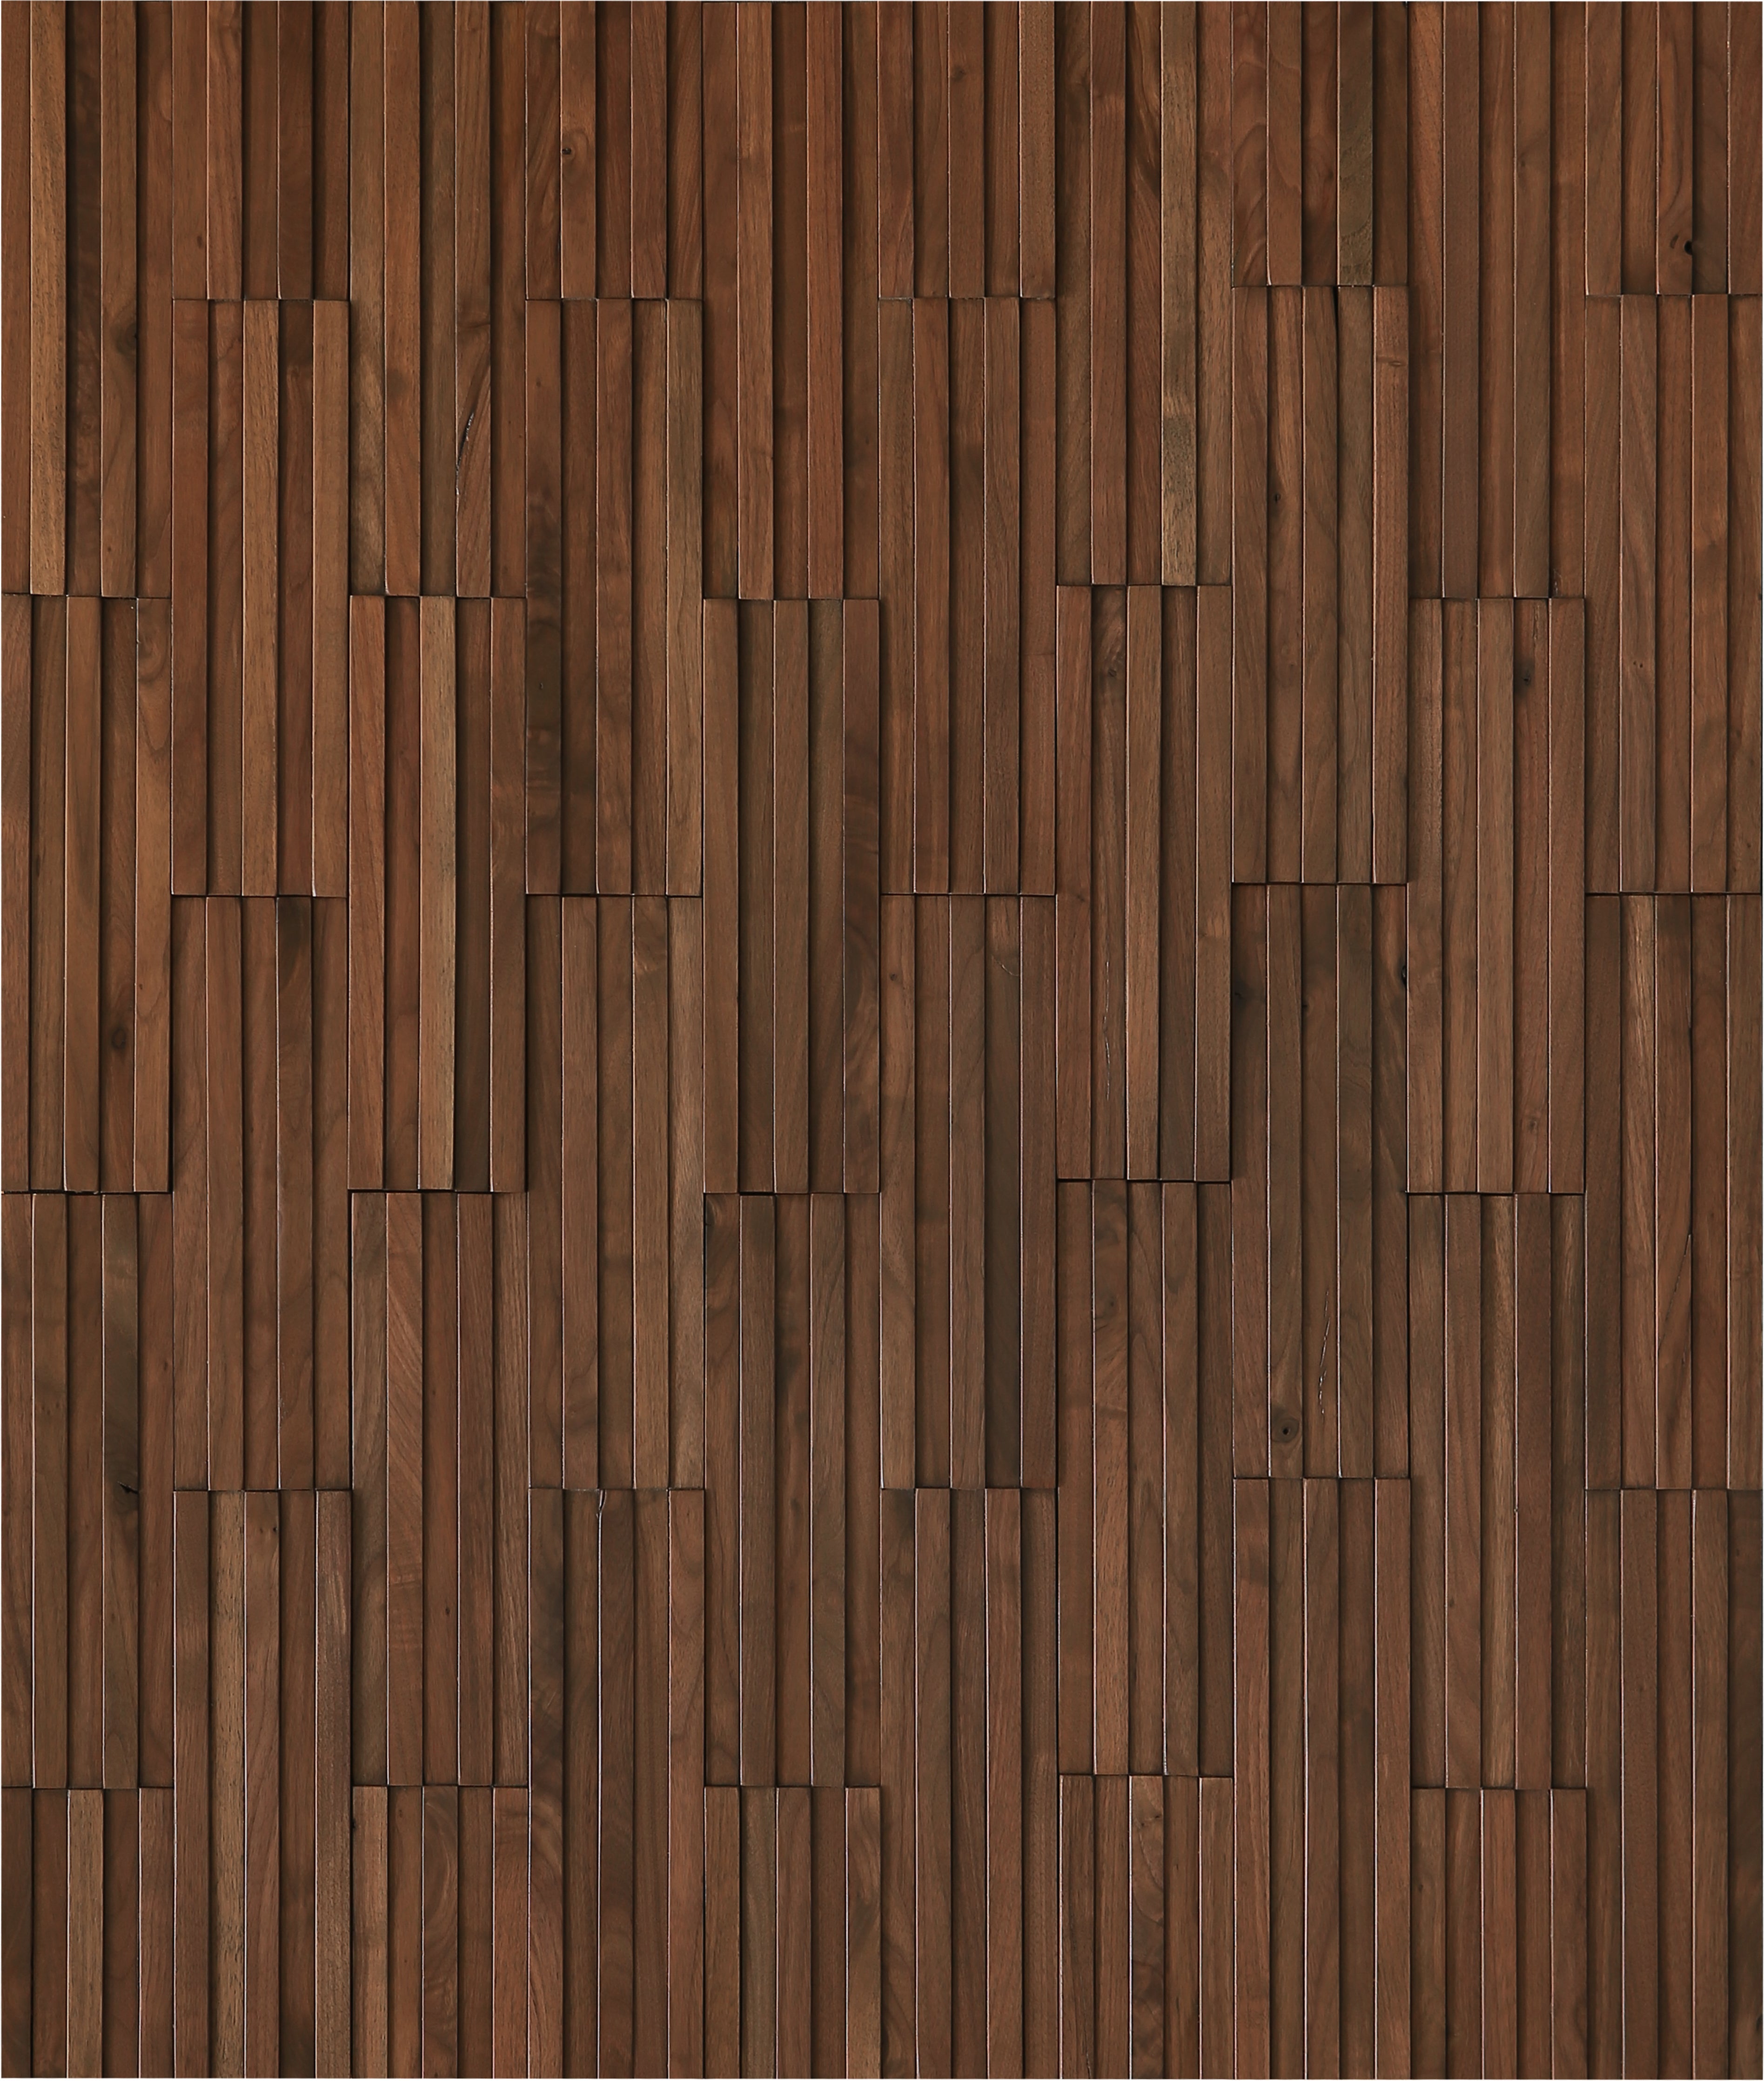 duchateau inceptiv parallels stout walnut three dimensional wall natural wood panel conversion varnish for interior use distributed by surface group international